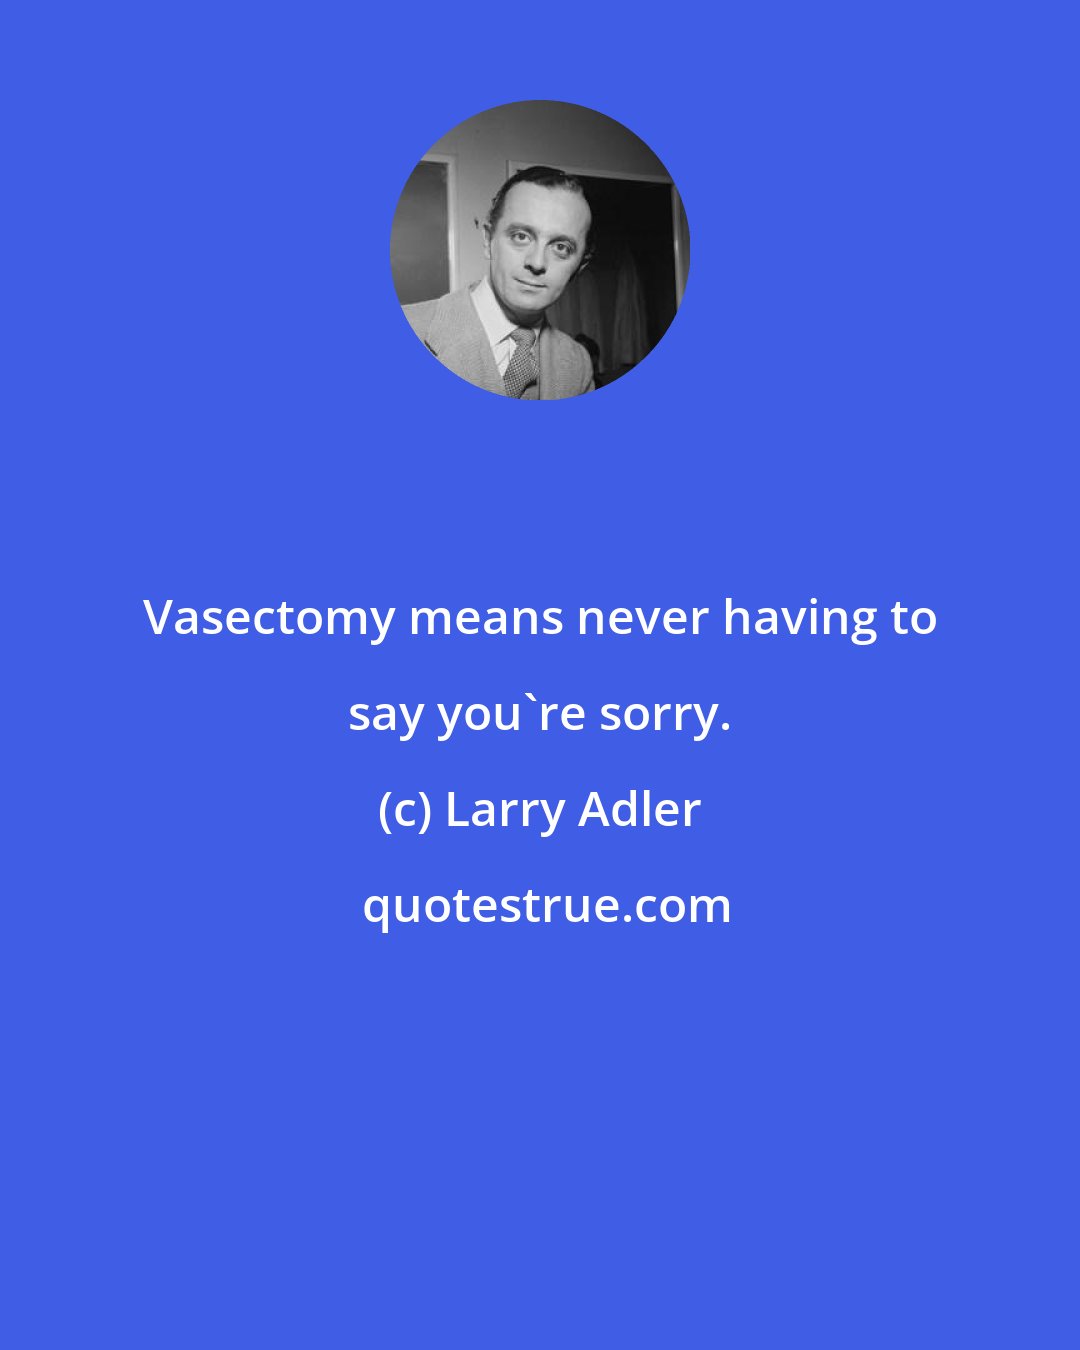 Larry Adler: Vasectomy means never having to say you're sorry.